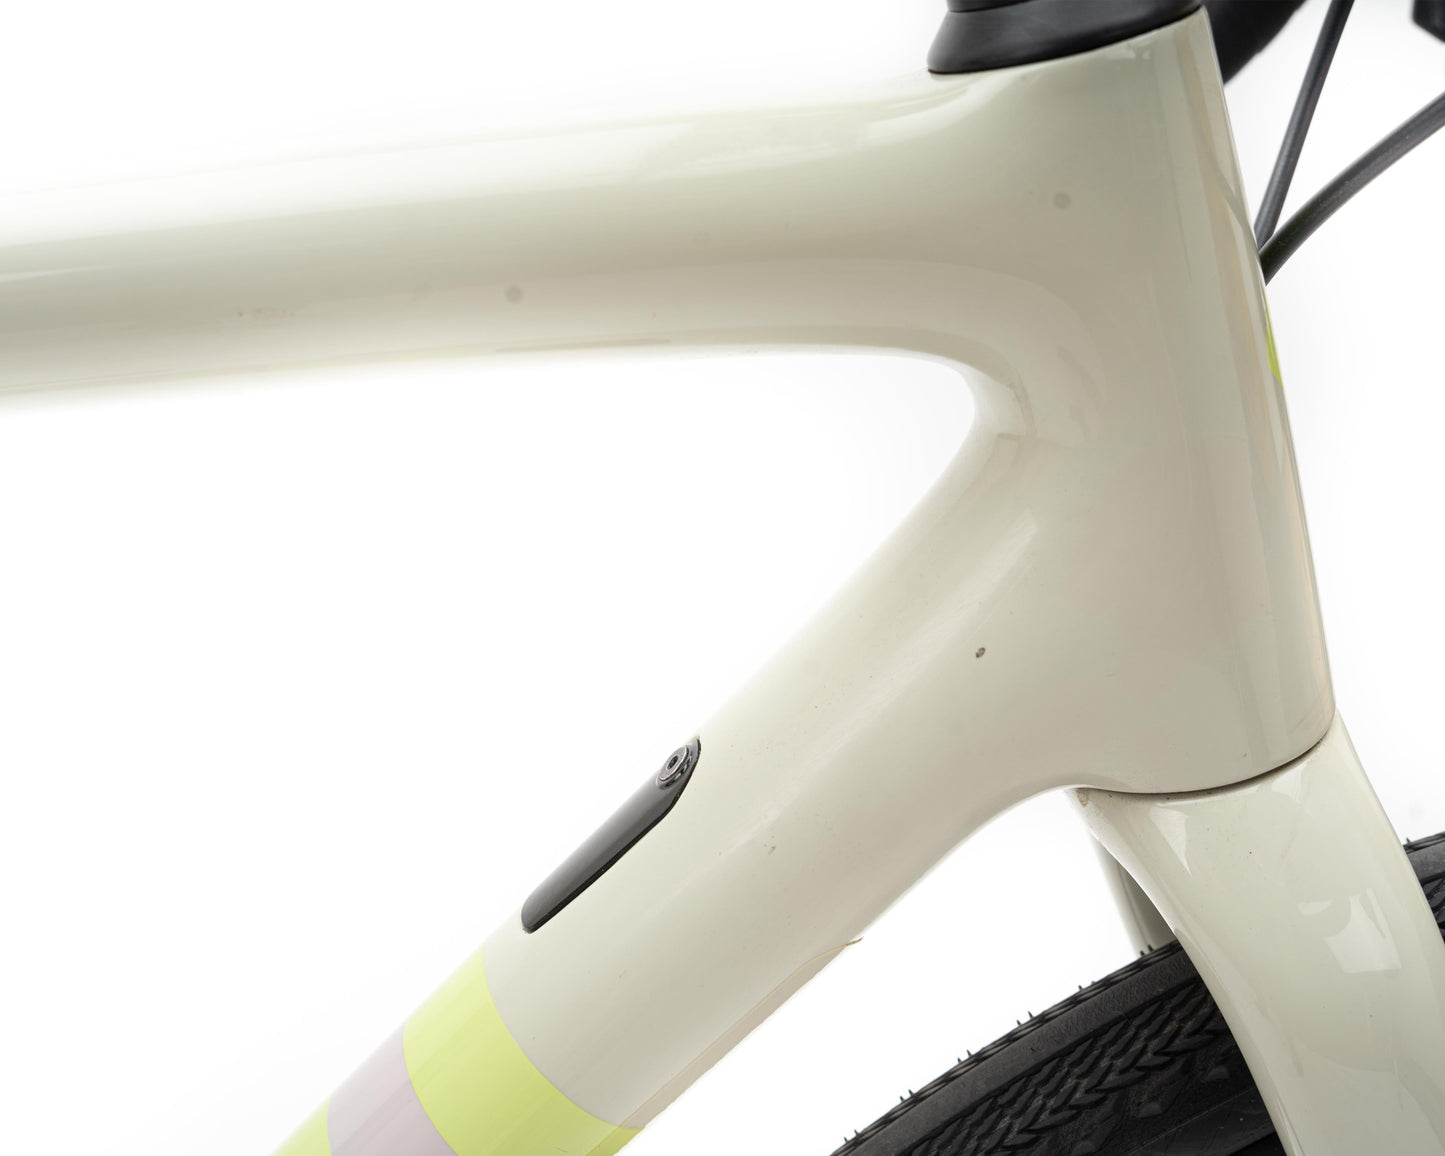 [D&R] SPECIALIZED CRUX EXPERT WHT/DOVGRY/PPYA 54